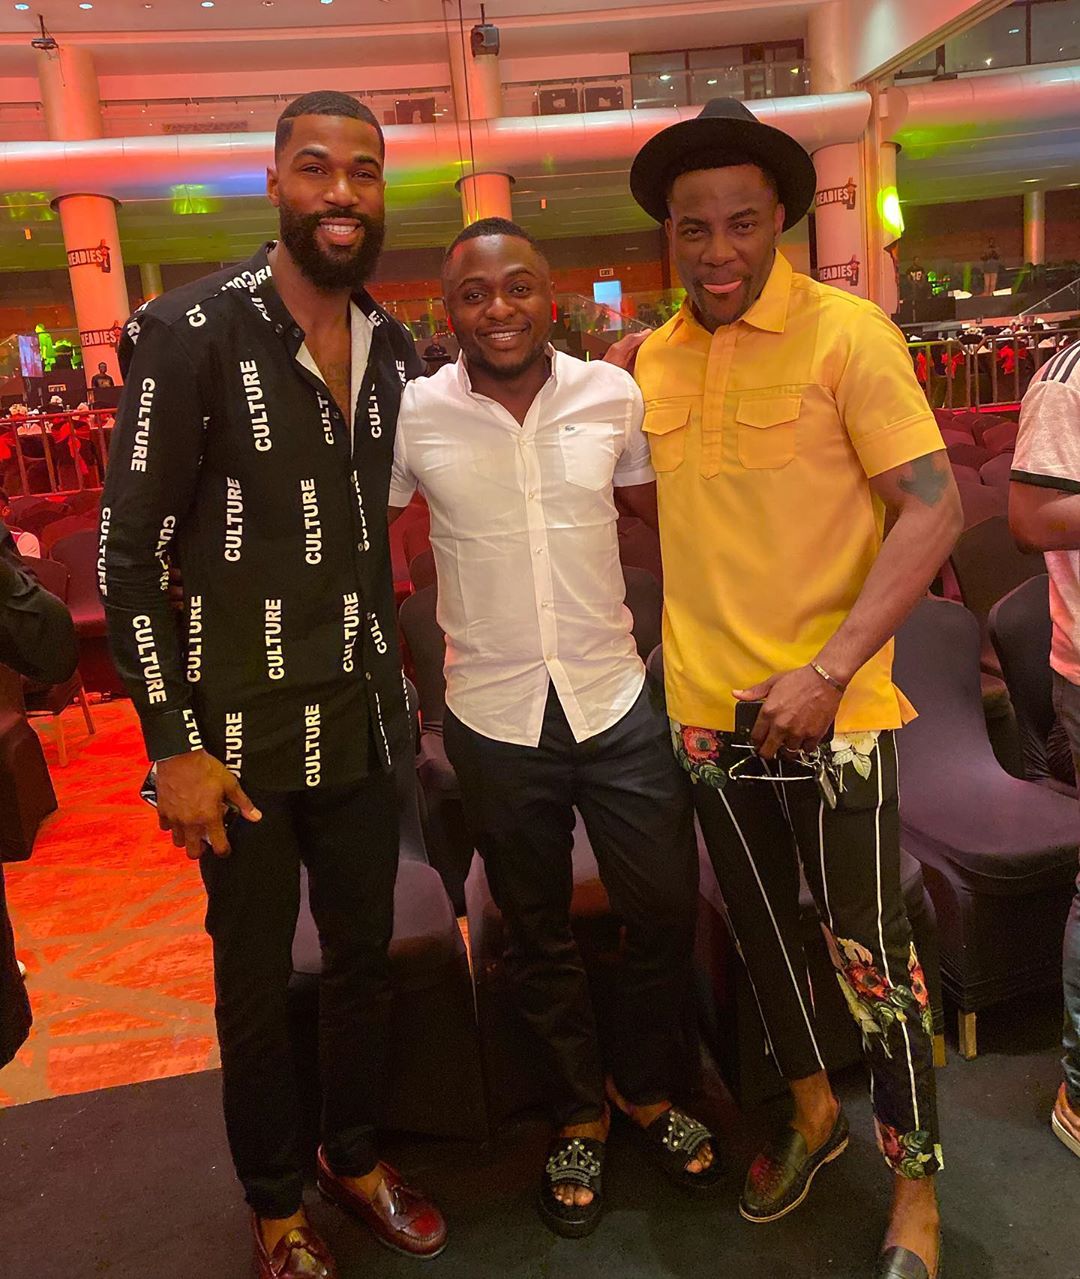 #Headies2019: Ubi Franklin With Mike, Mercy, BamBam And Ebuka At The Headies 2019